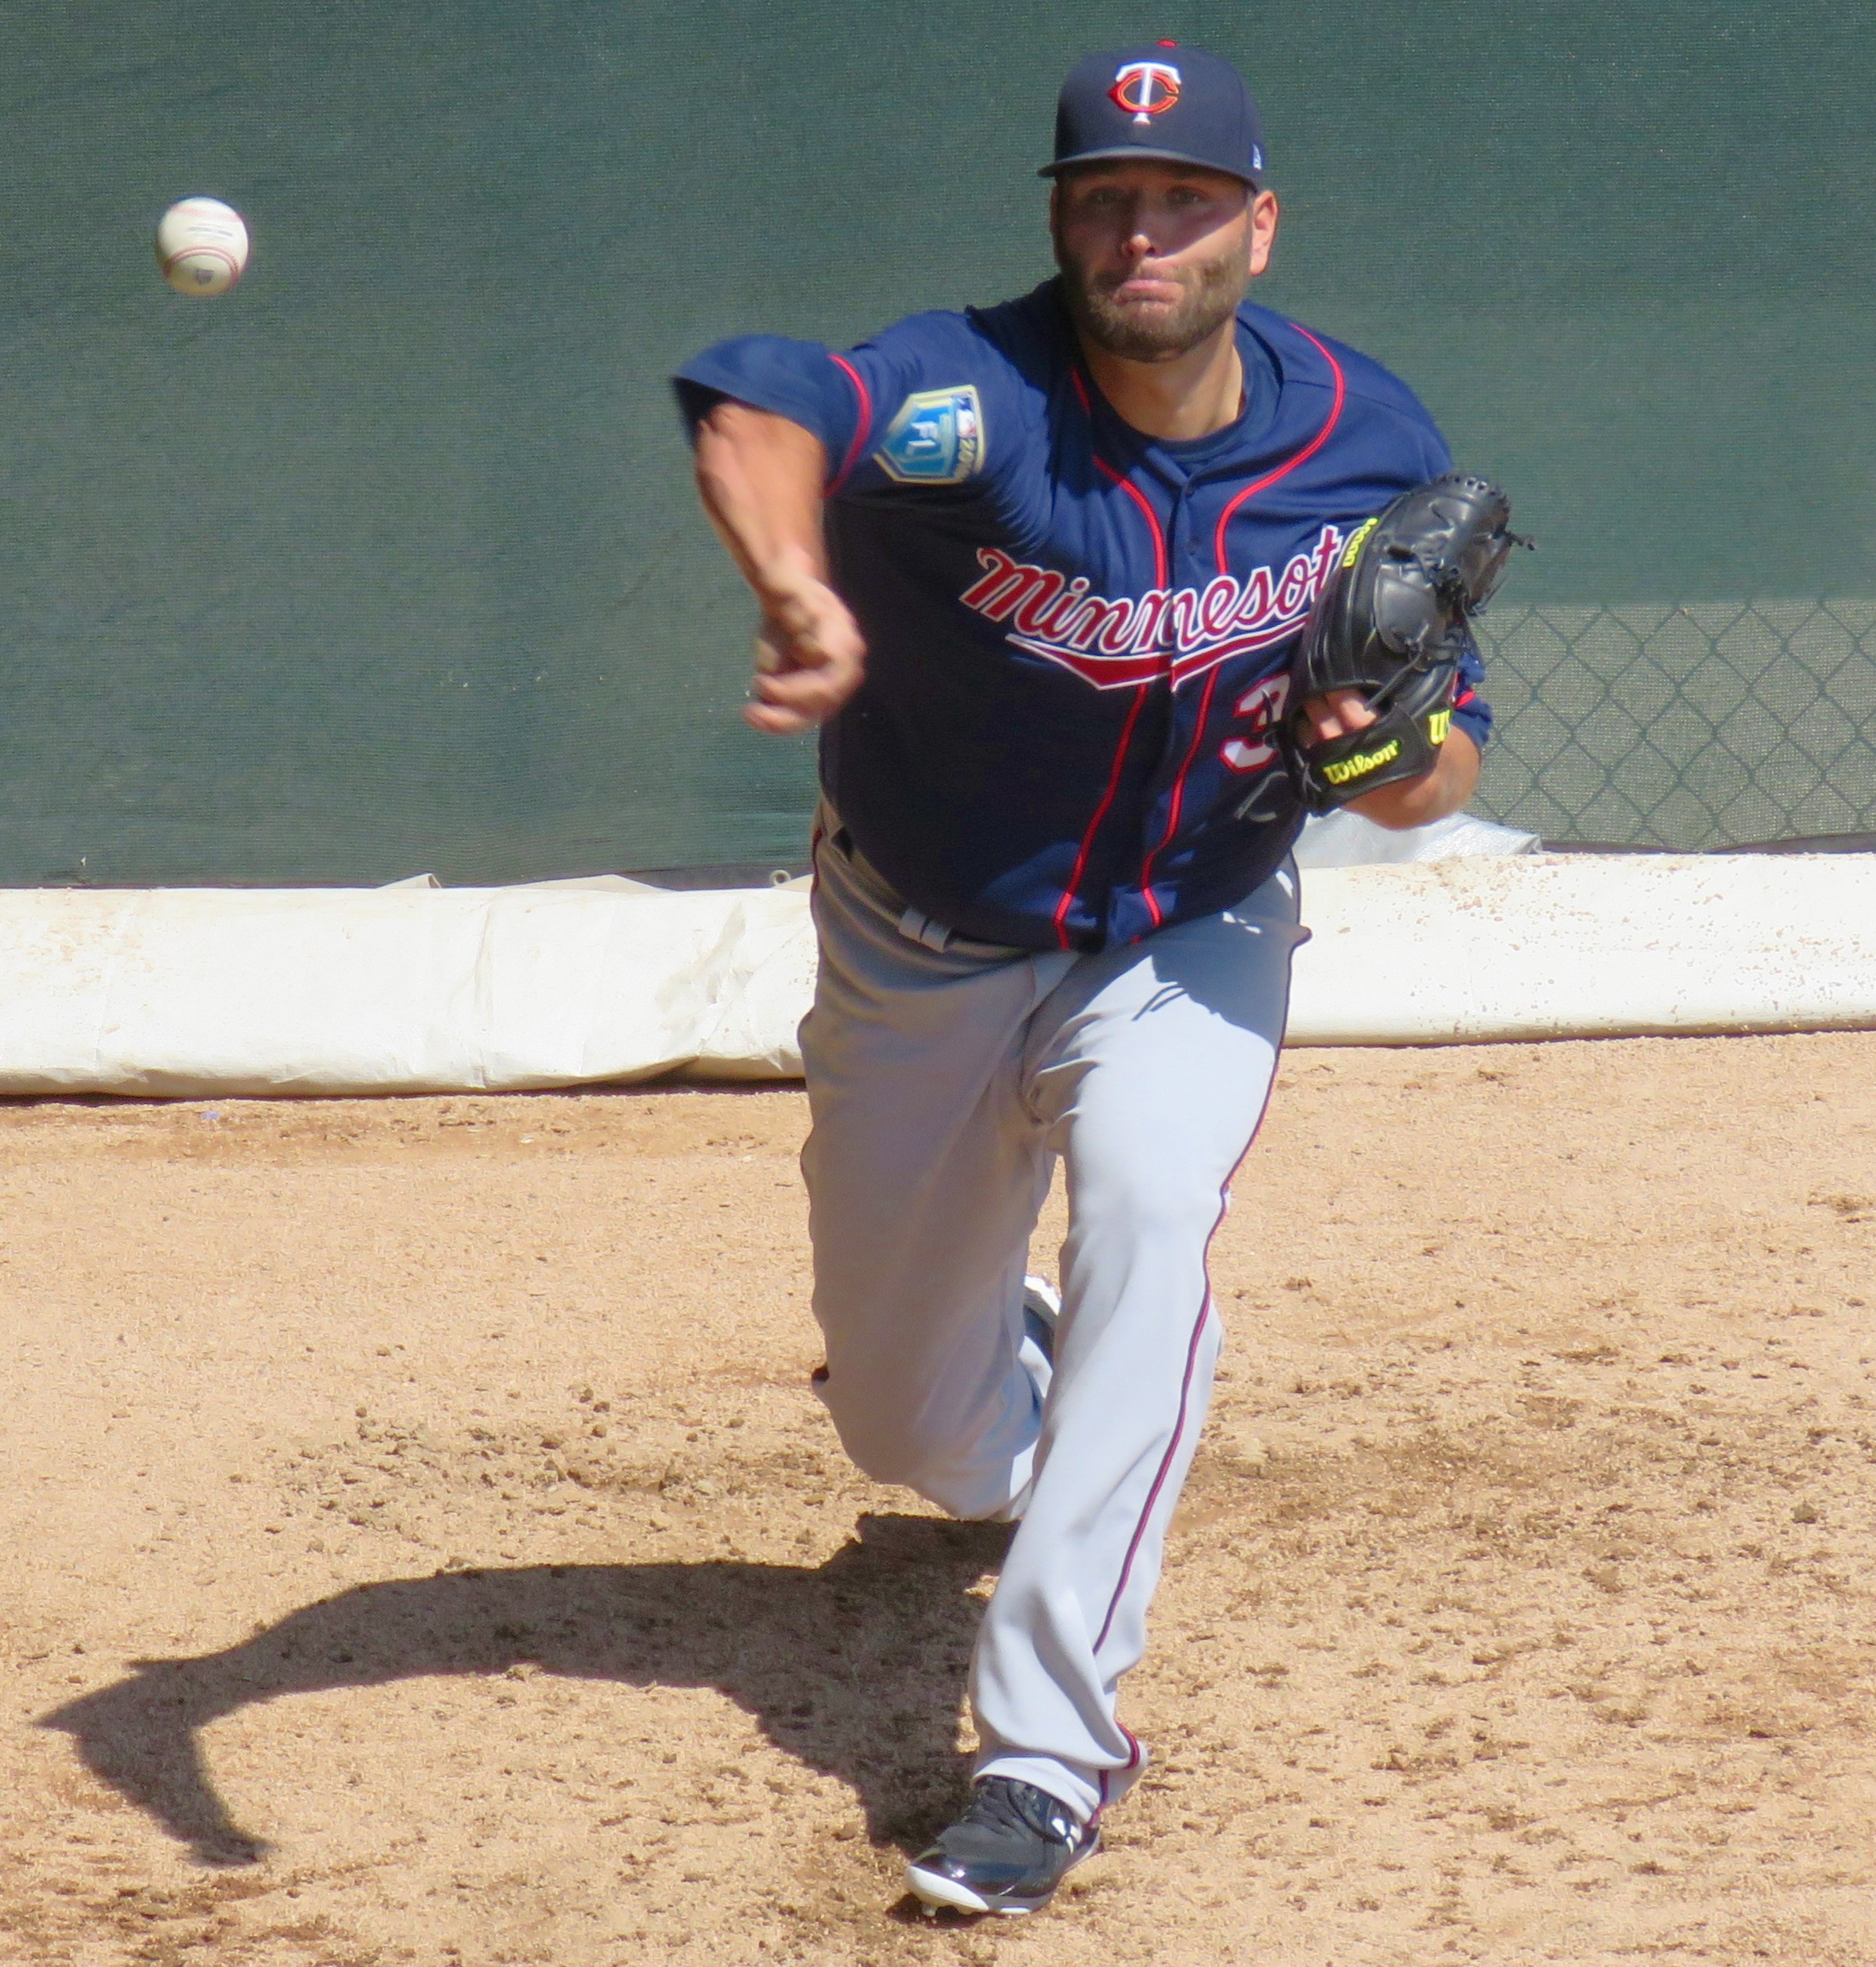 File:Lance Lynn pitching in bullpen for the Minnesota Twins in